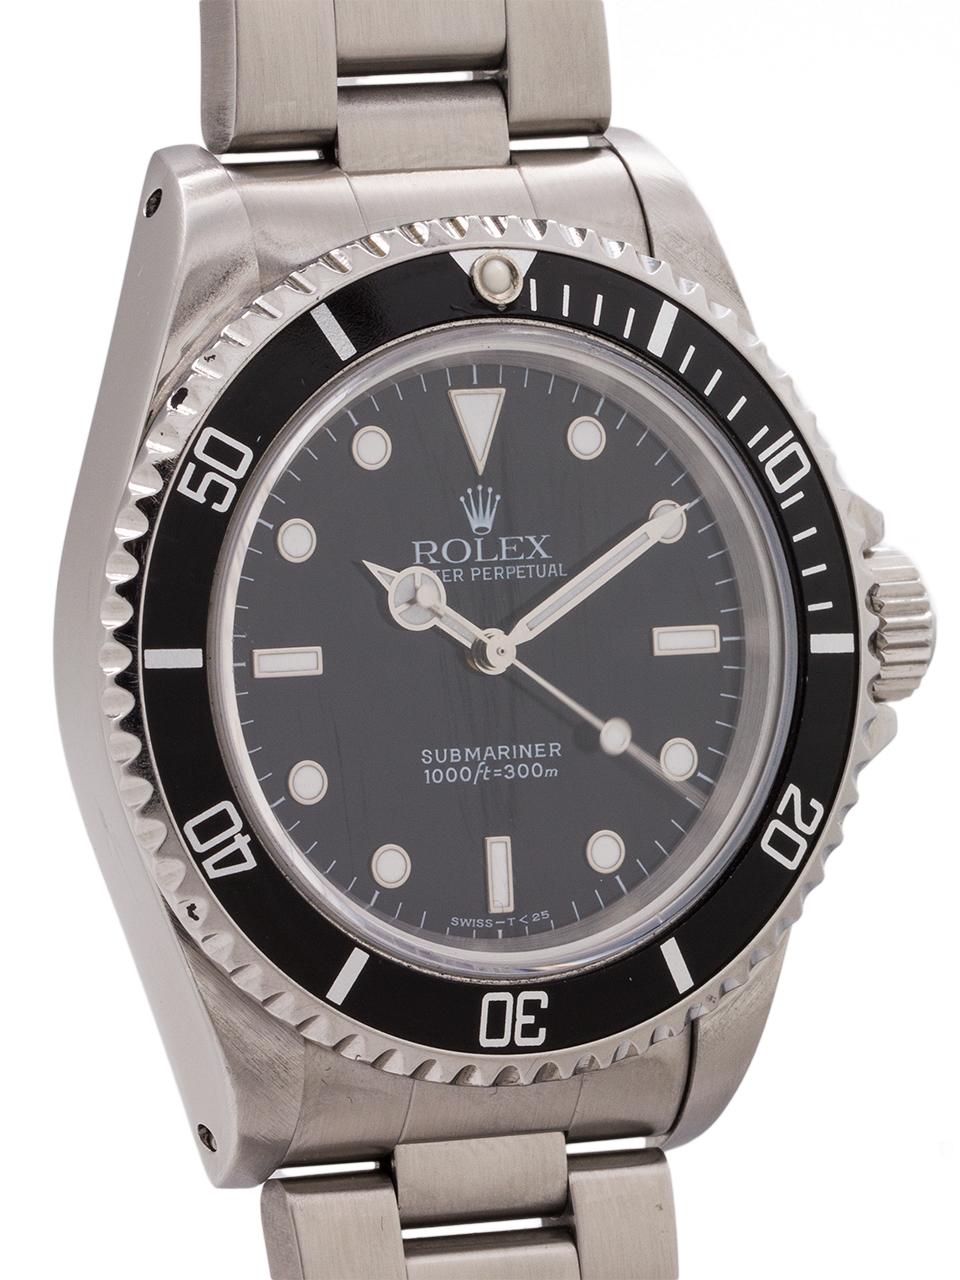 
Classic Rolex Submariner stainless steel ref# 14060 T6 serial # circa 1996. Featuring a 40mm diameter case with sapphire crystal and unidirectional elapsed time bezel. Very clean example with glossy black original dial with tritium luminous indexes